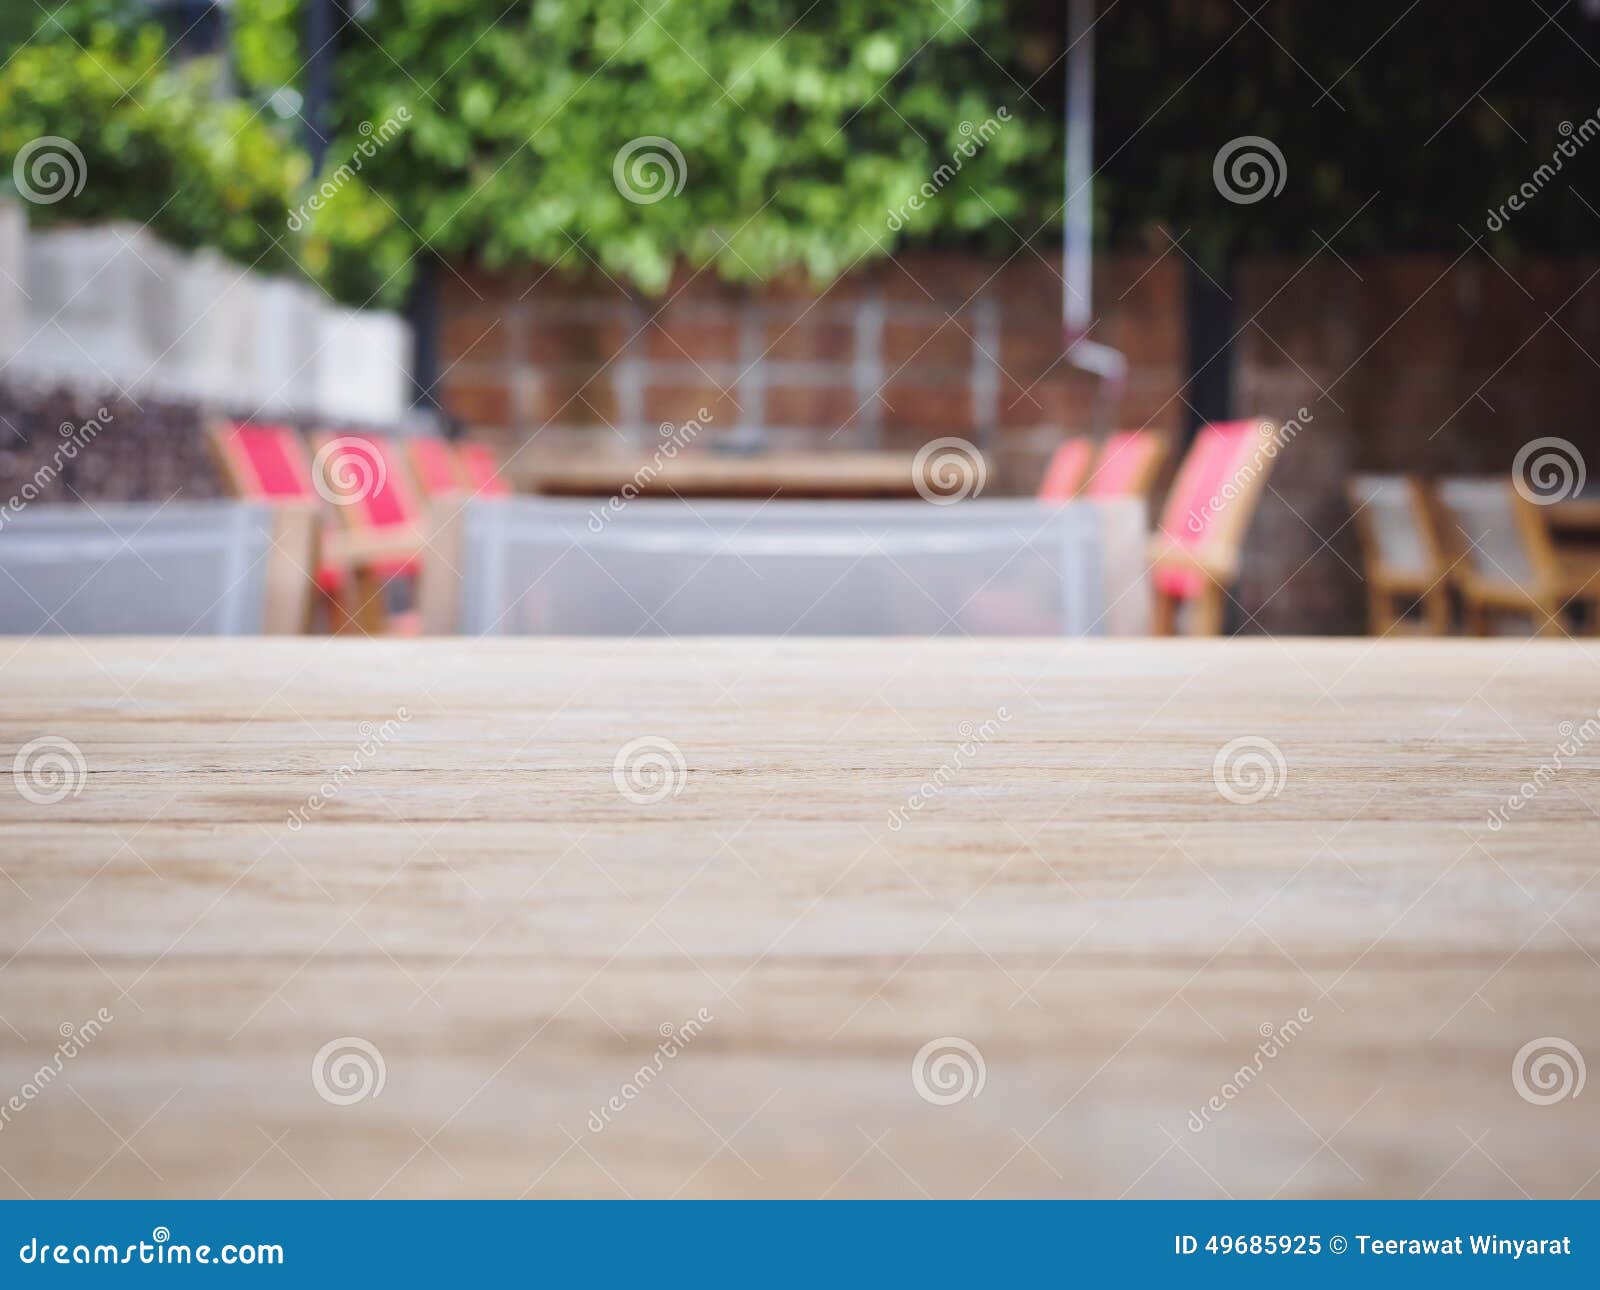 Top Of Wooden Table With Blurred Restaurant Cafe 